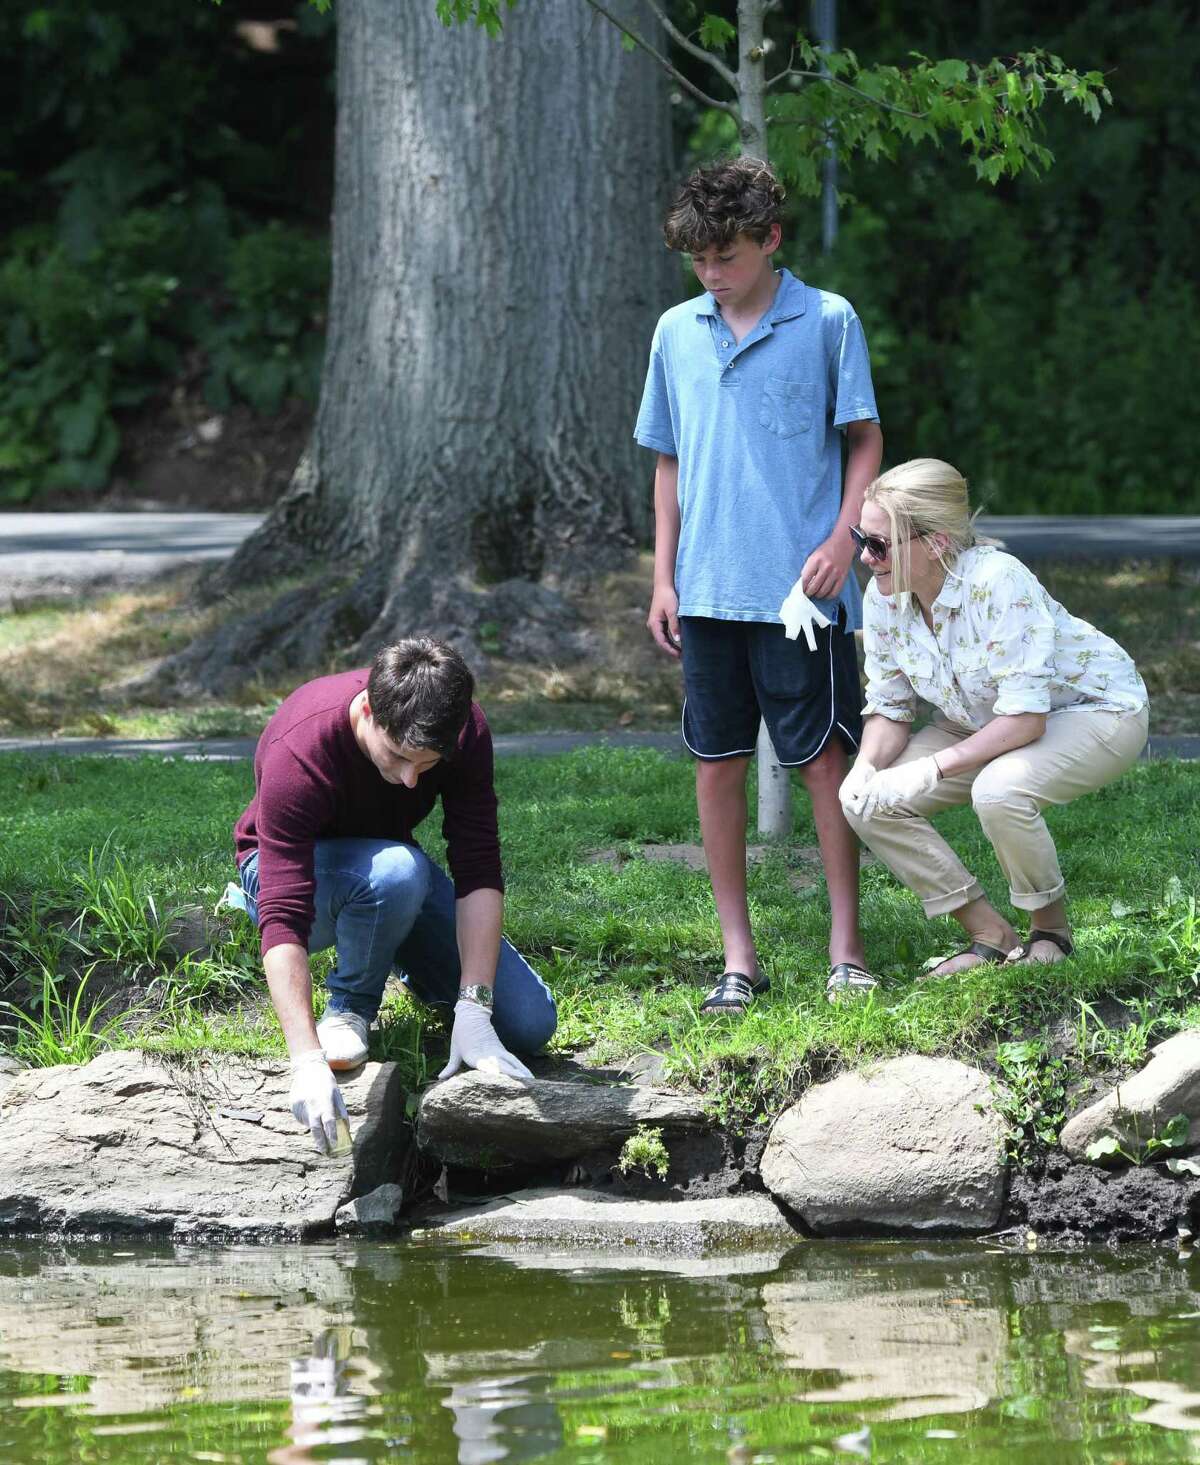 Greenwich's Jack Linardos, 17, left, collects a sample for a water test with Riverside's Luke Martinez, 15, and Dr. Caroline Martinez at Binney Park in Old Greenwich, Conn. Sunday, July 26, 2020. Dr. Martinez has discovered potentially dangerous algae blooms in local waters, something she said could present a threat to shellfish and to people and pets.